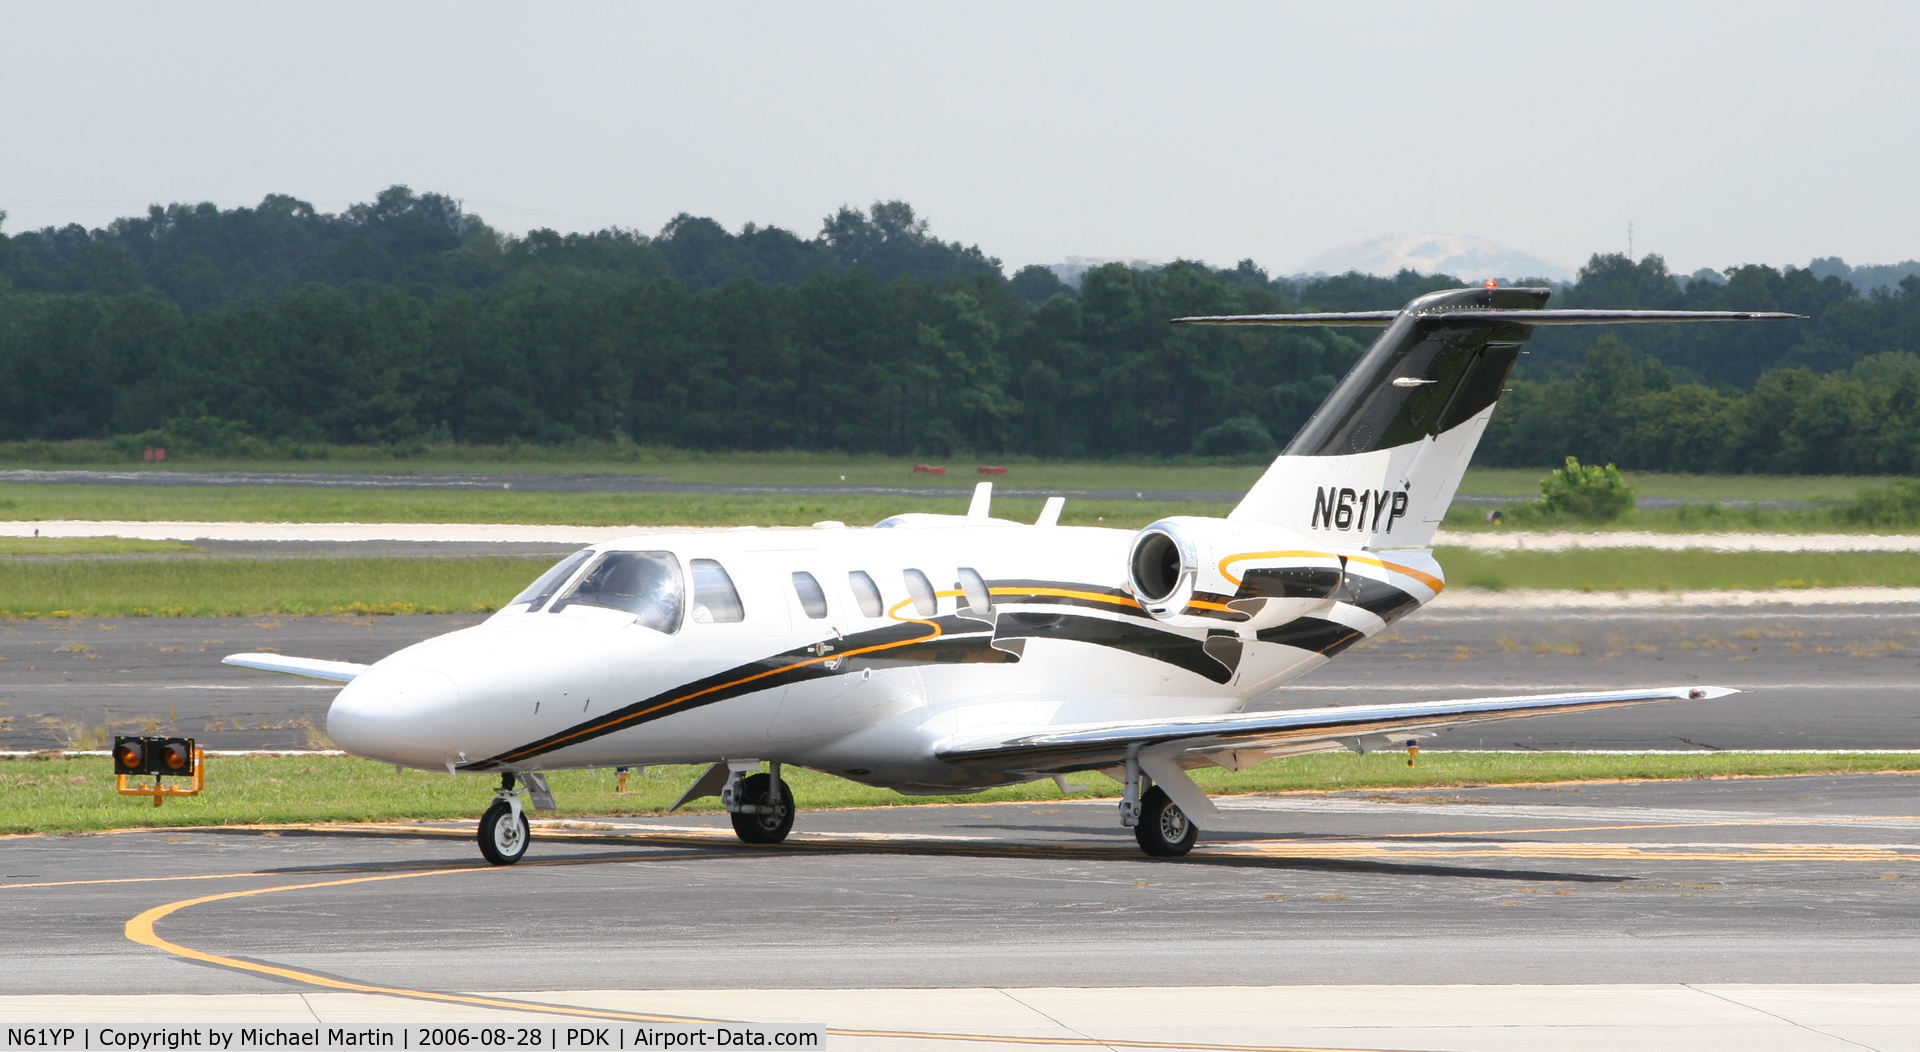 N61YP, 1998 Cessna 525 CitationJet C/N 525-0237, Taxing to Signature Air